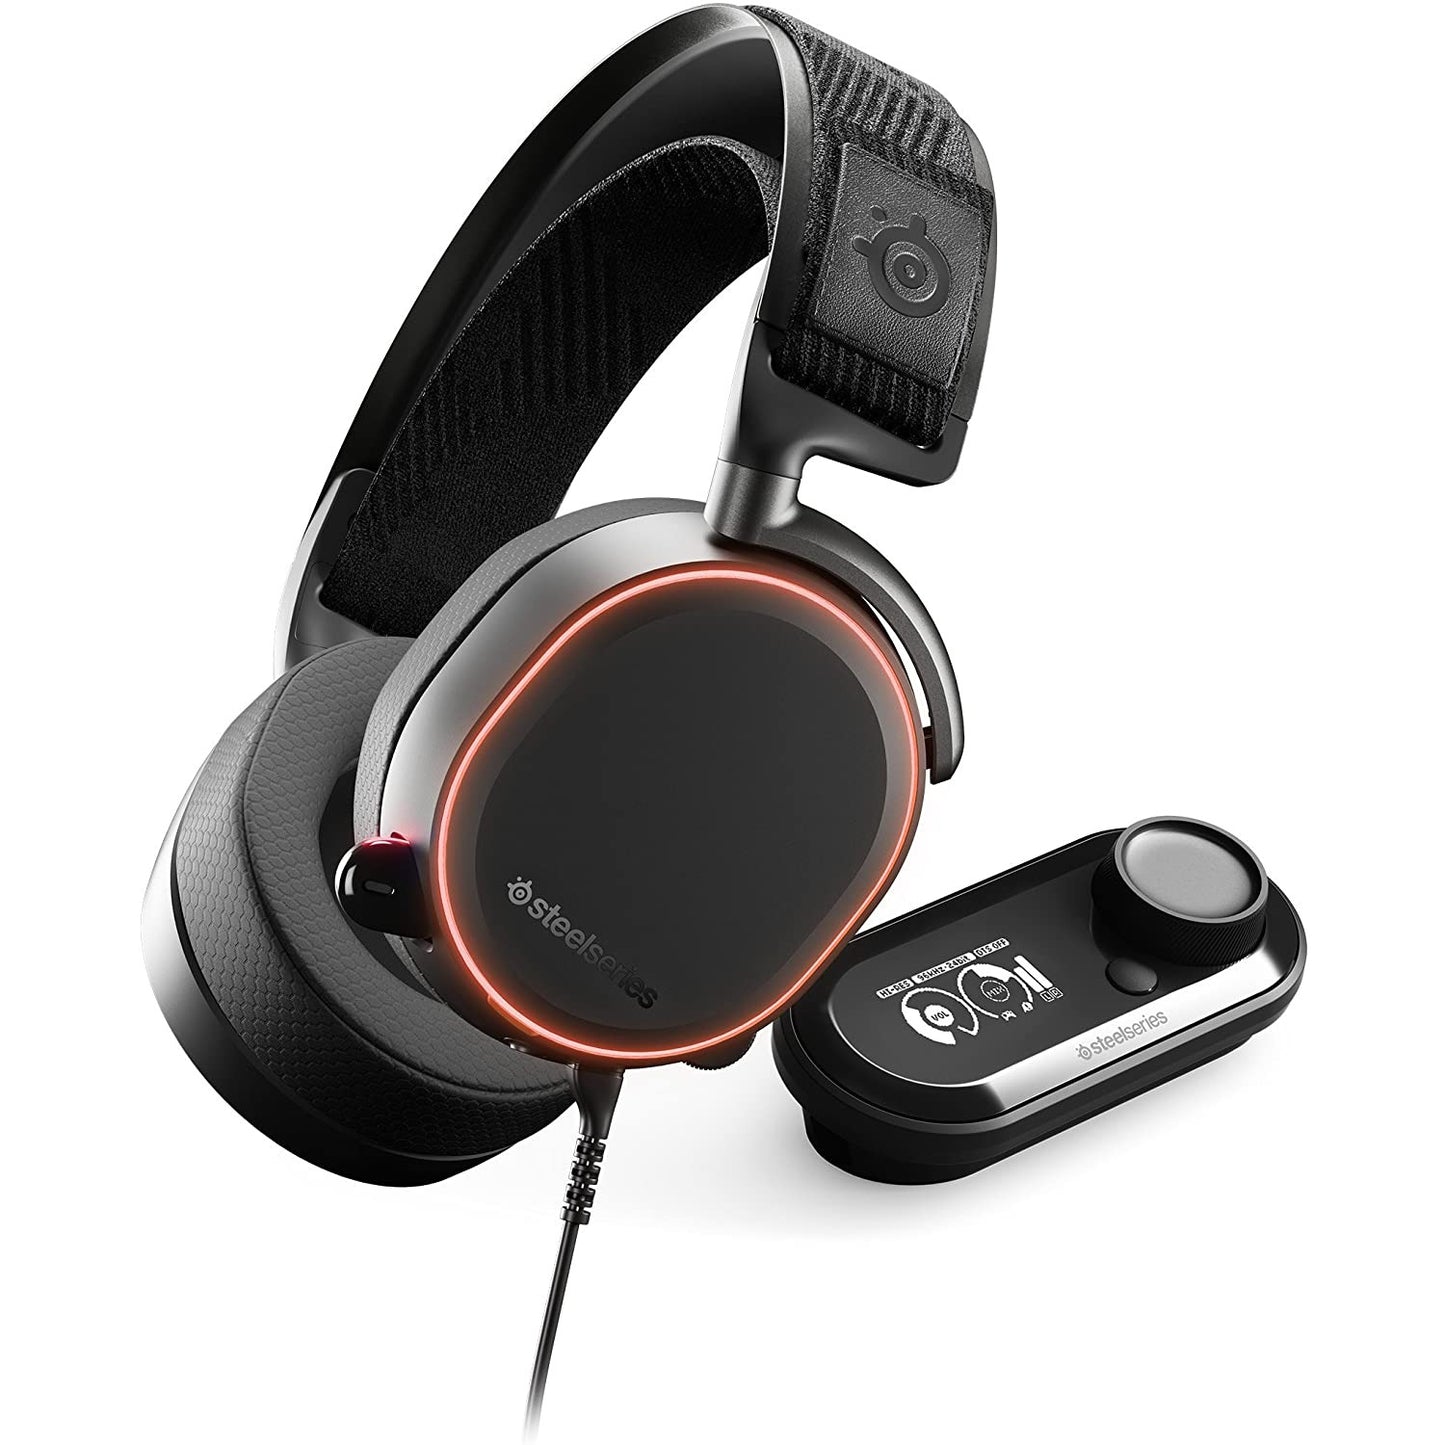 Steelseries Arctis Pro with GameDAC